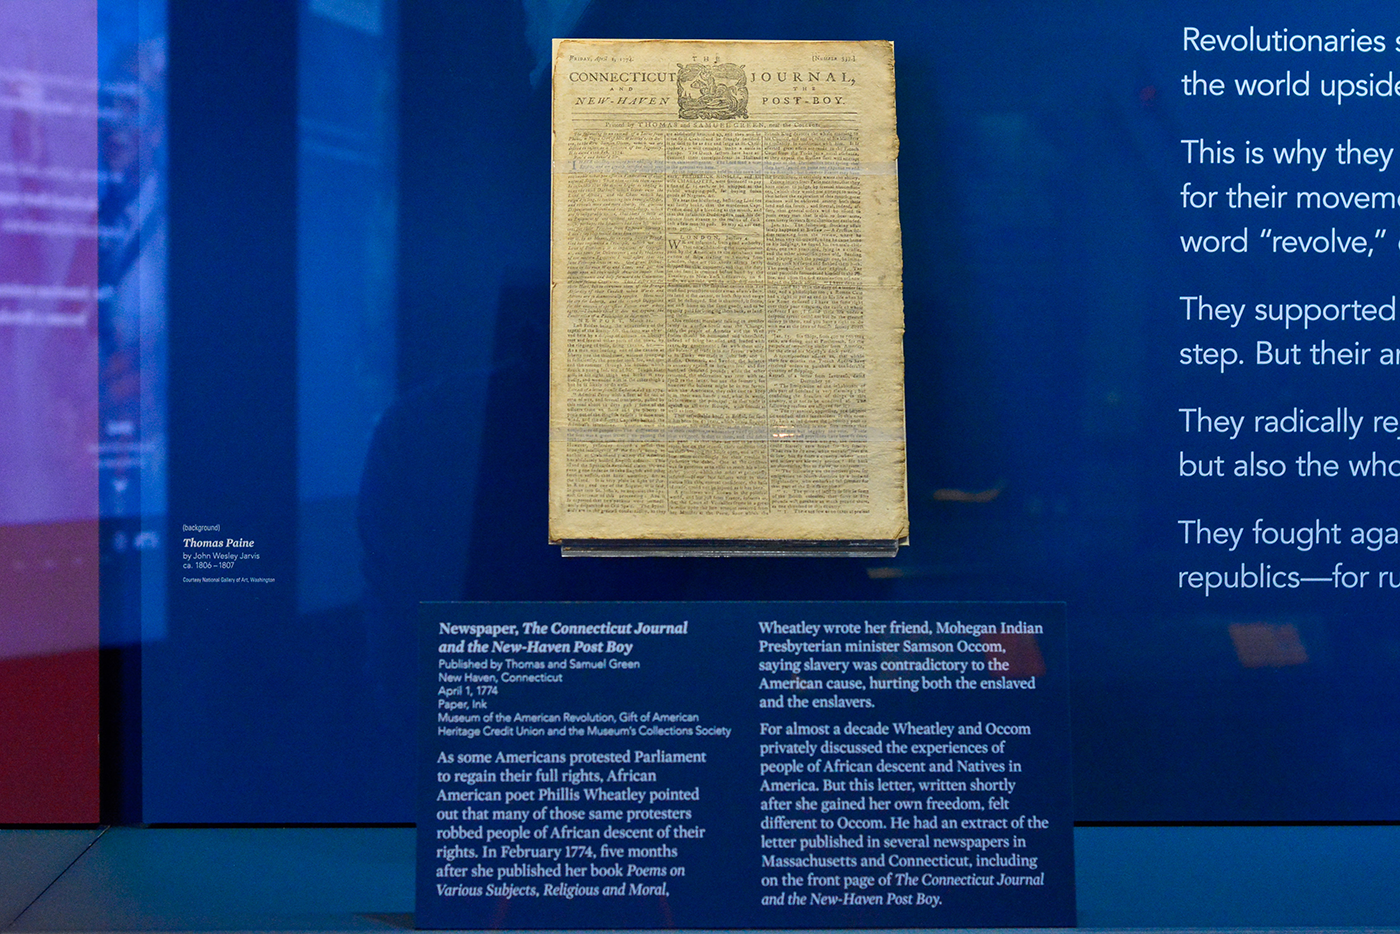 A 1774 newspaper printing of a letter written by African American poet Phillis Wheatley is now in the permanent collection of the Museum of the American Revolution.